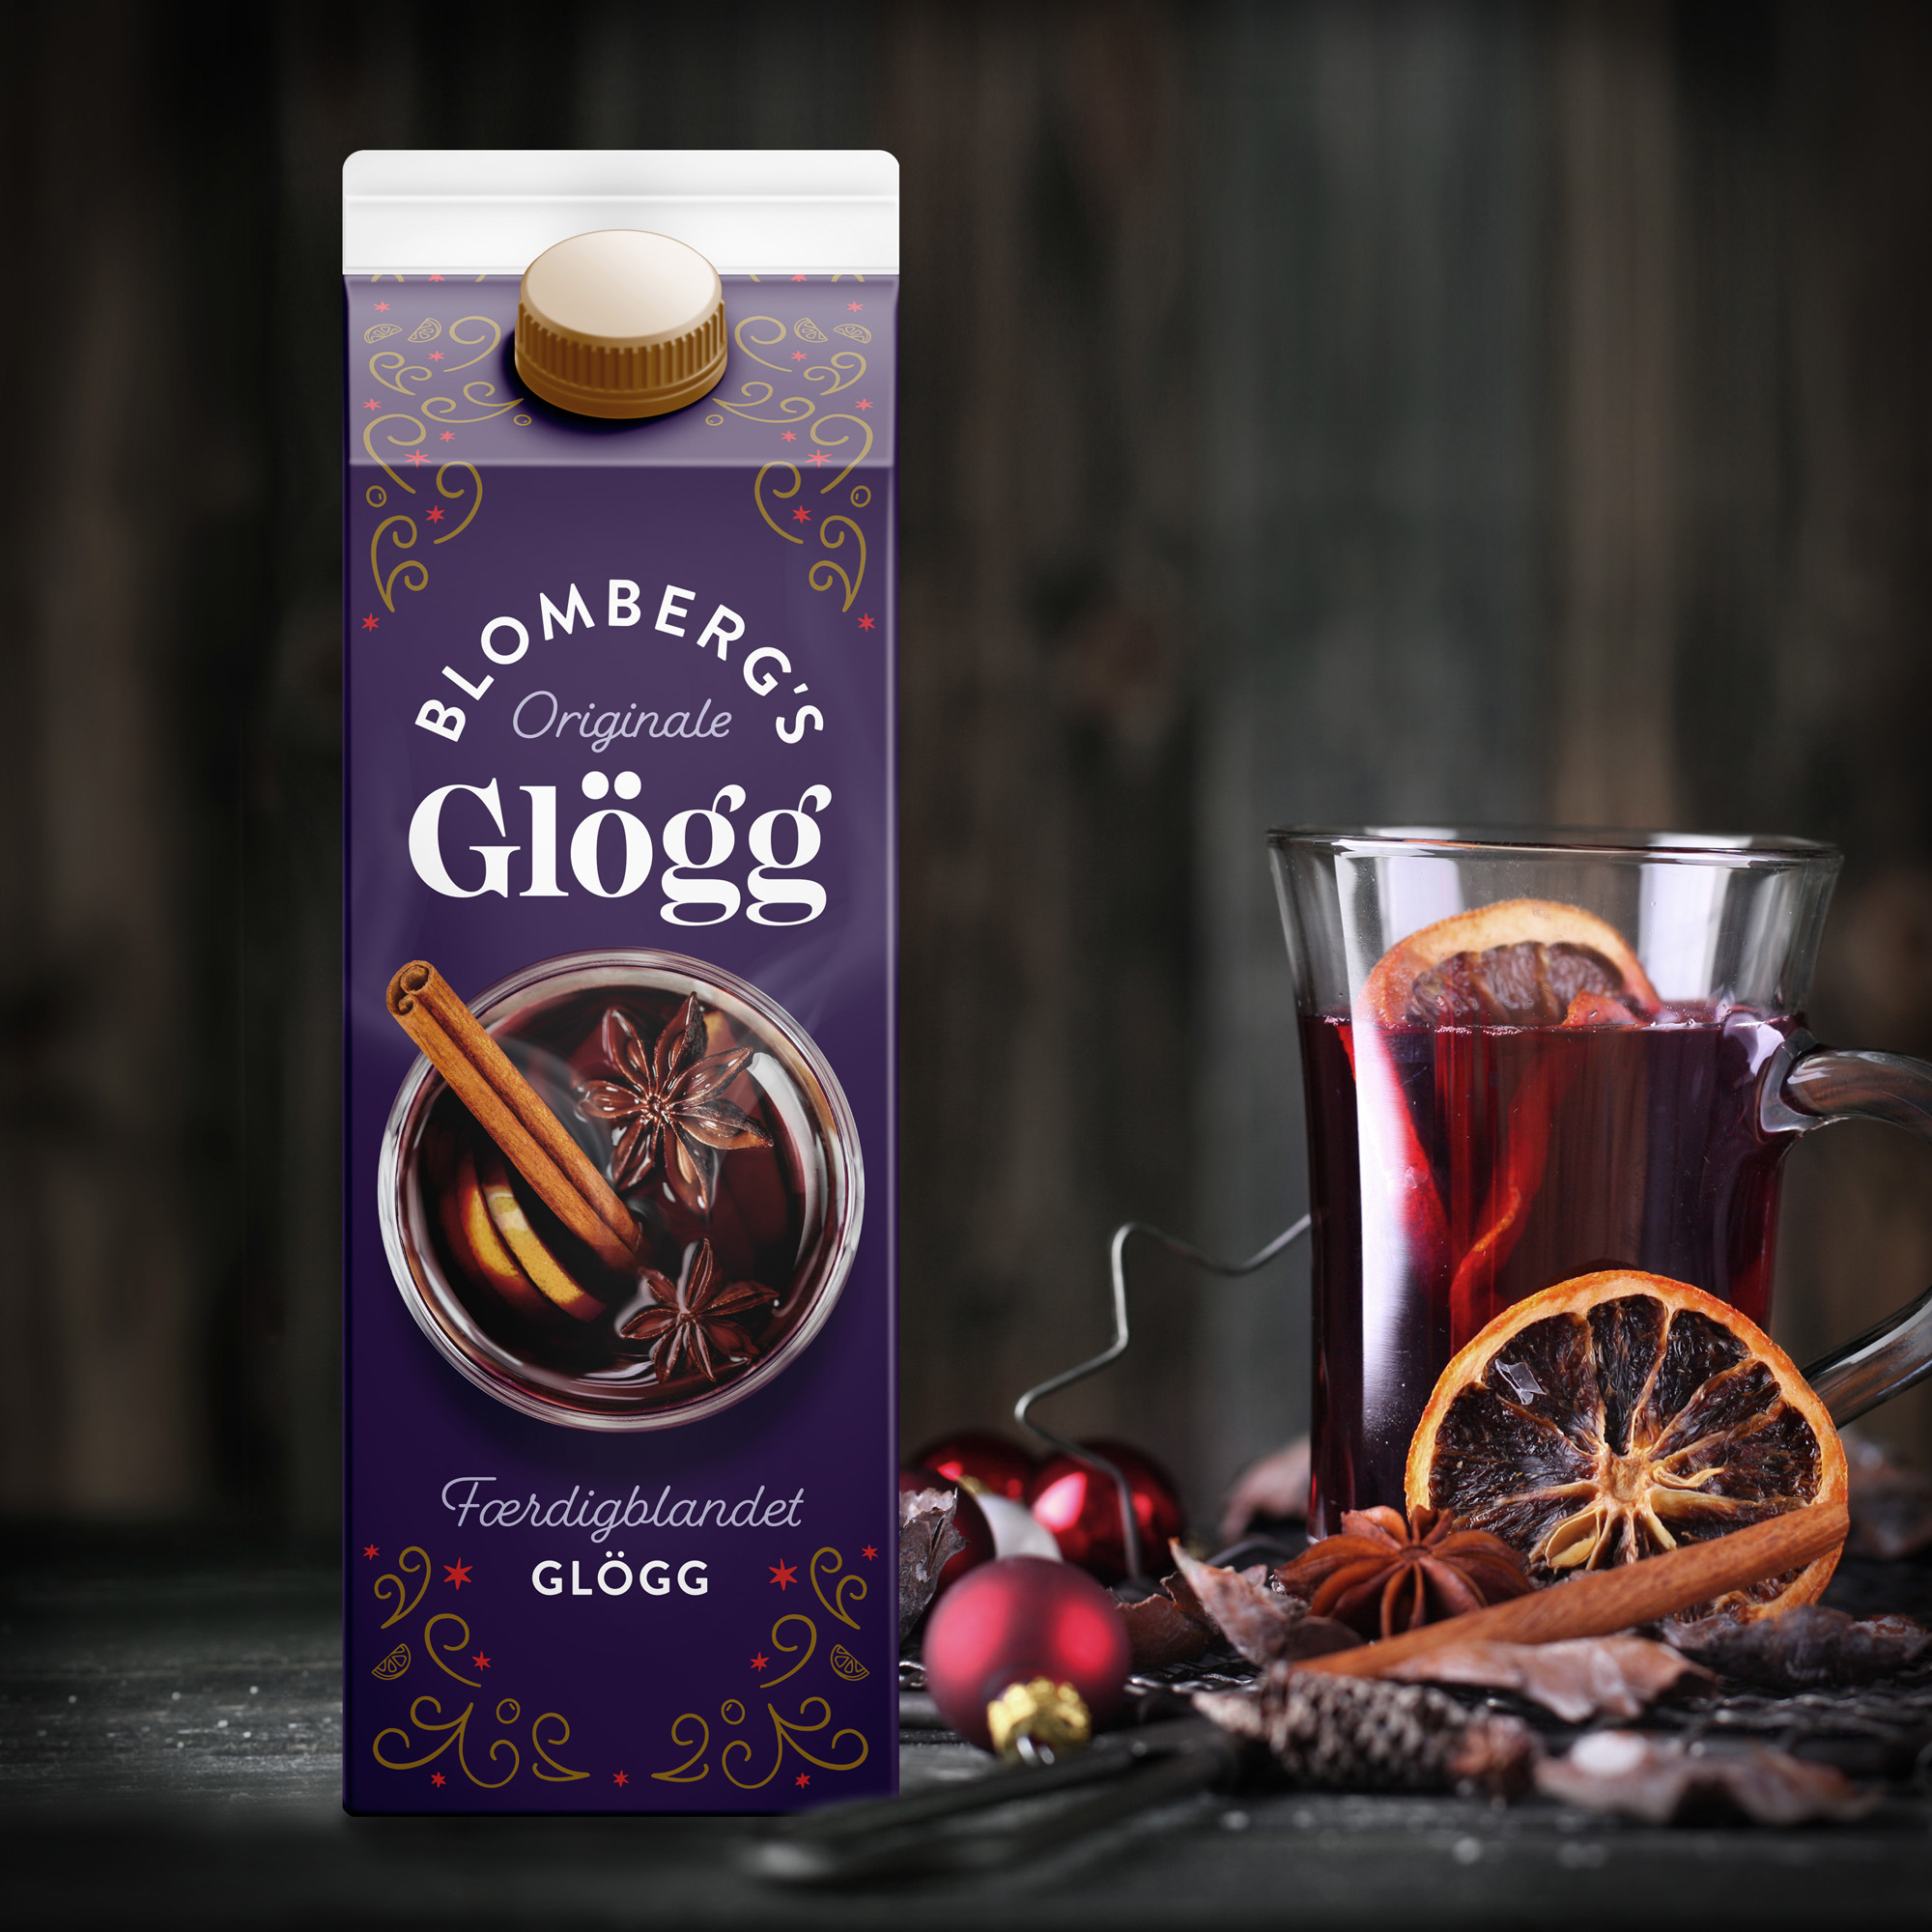 Taste of Tradition with Blomberg’s Glögg